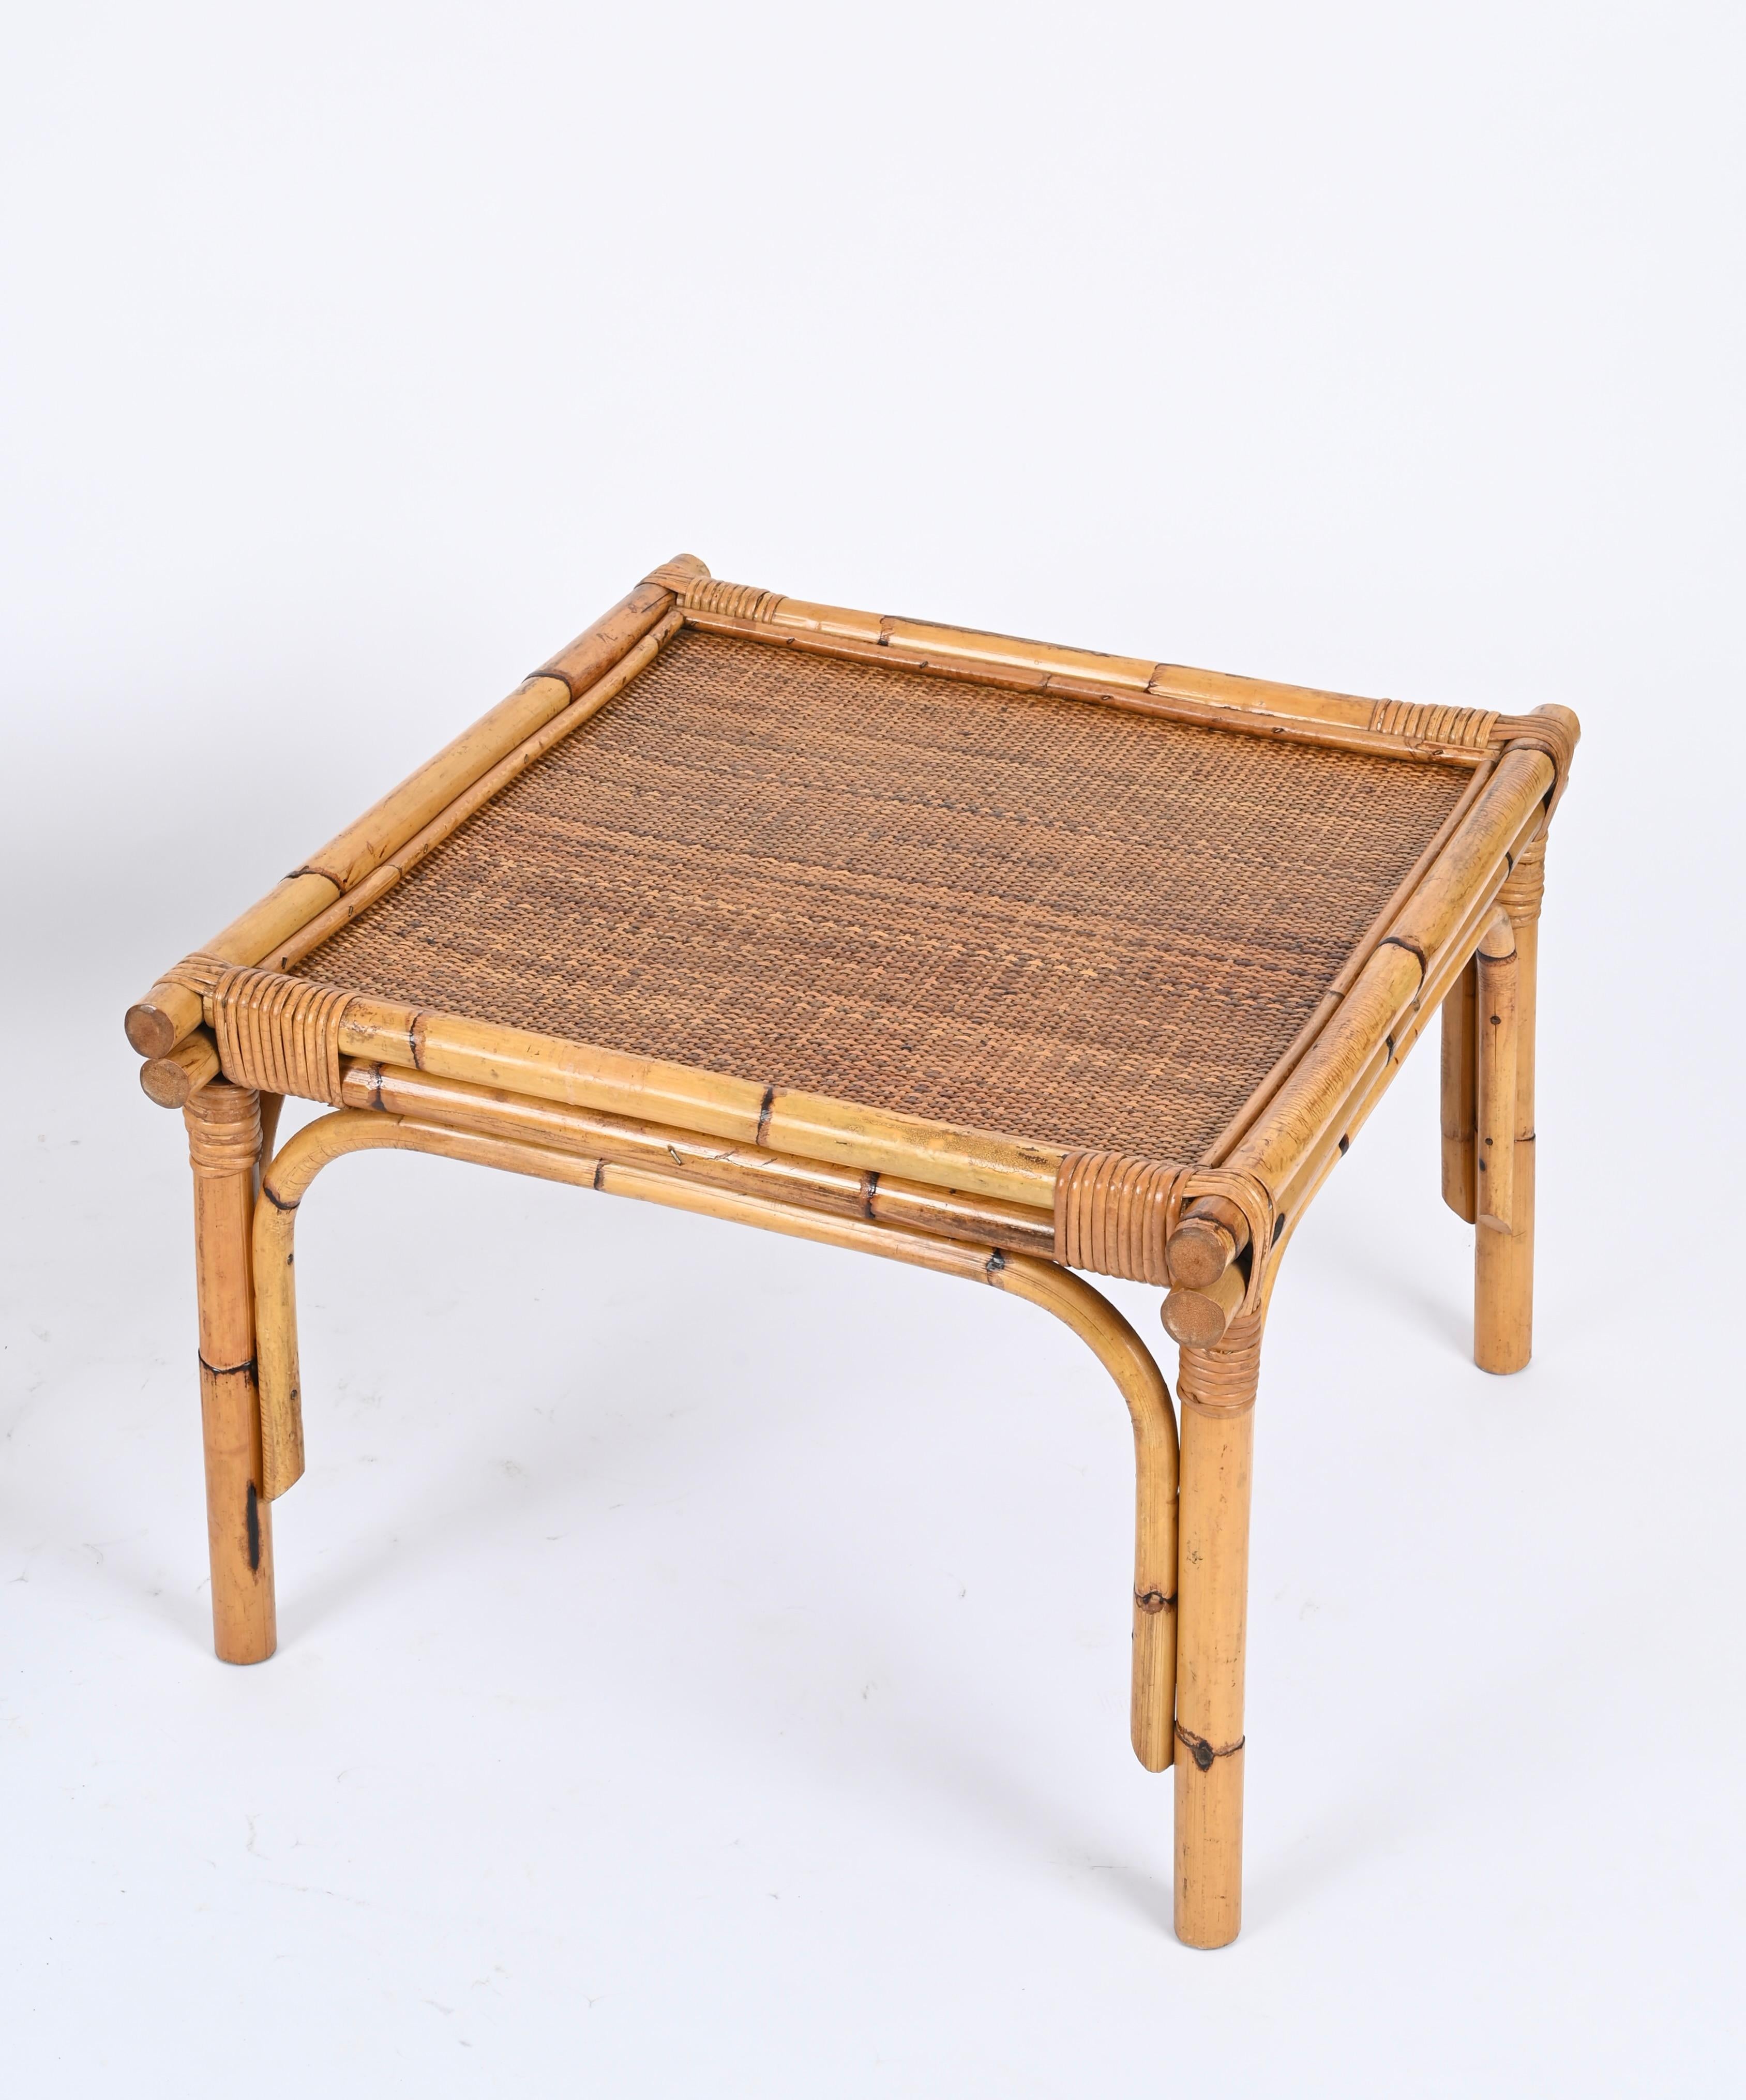 Bamboo Pair of French Riviera Square Coffee Table in Rattan and Wicker, Italy 1970s For Sale